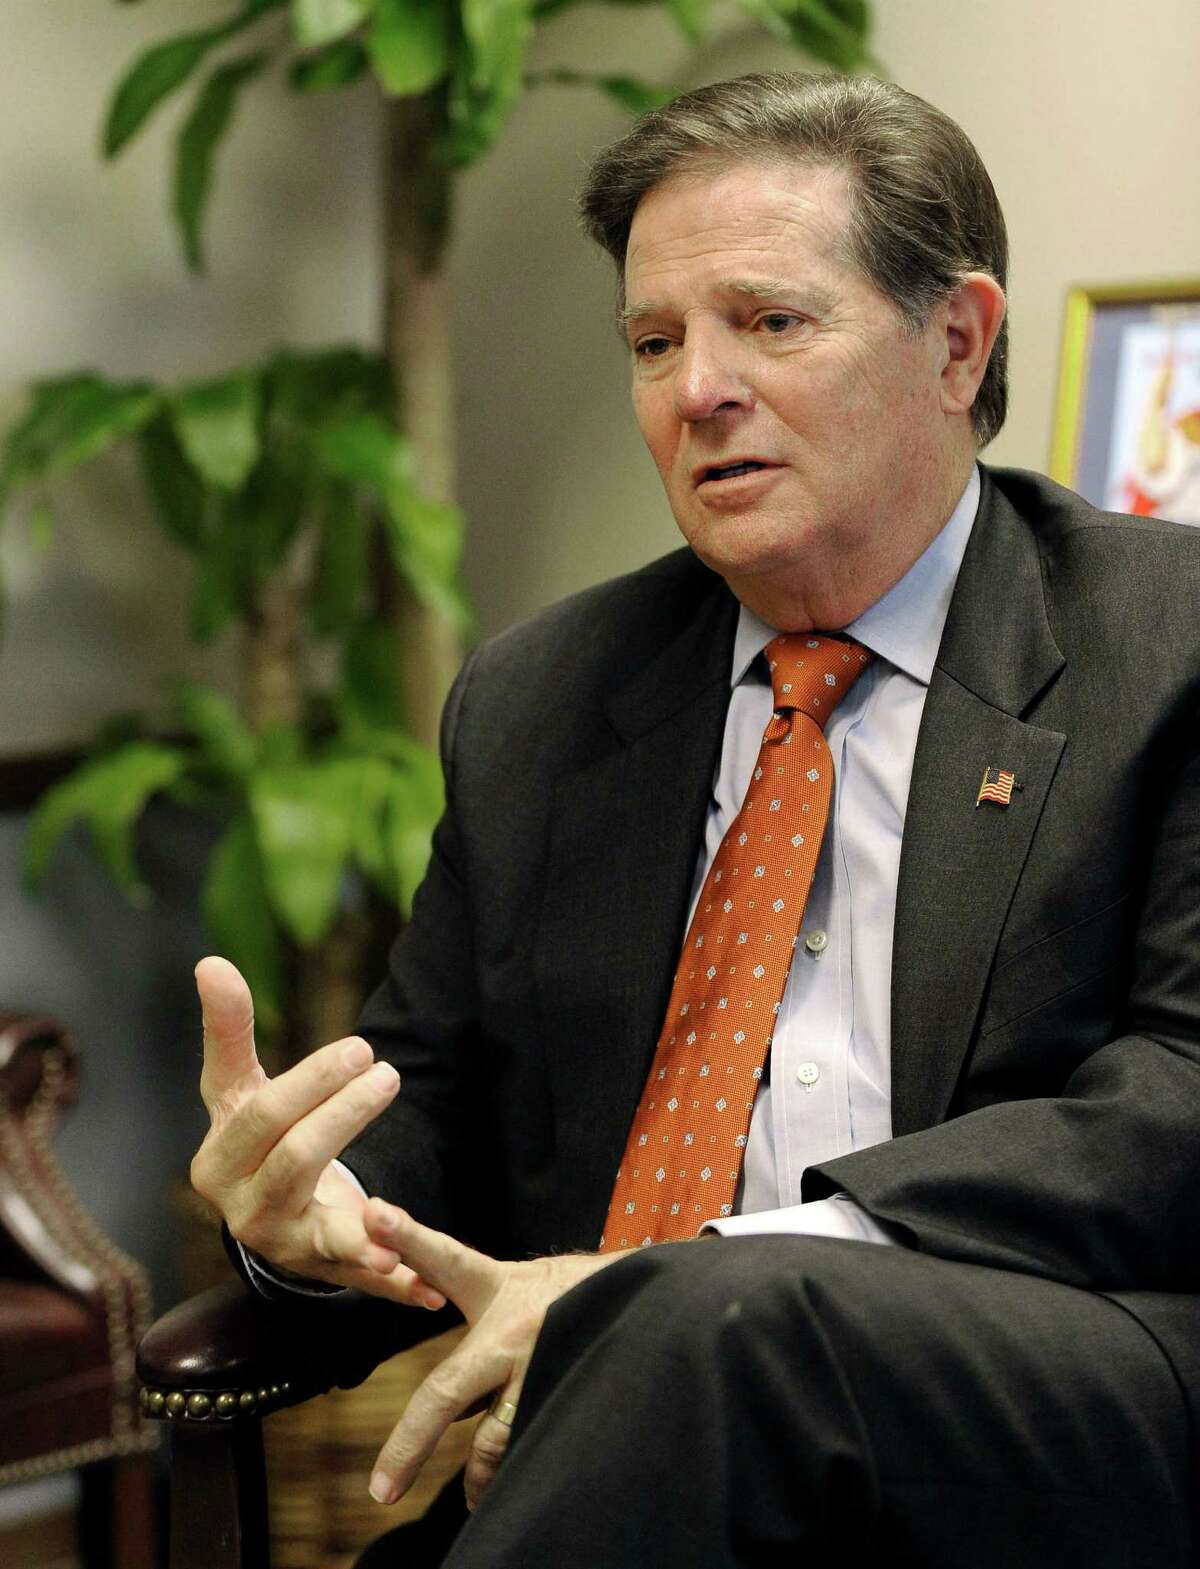 In this Wednesday, Sept. 19, 2012 photo, former House Majority Leader Tom DeLay speaks about his upcoming appeal on a money laundering conviction at his attorney's office in Houston. (AP Photo/Pat Sullivan)